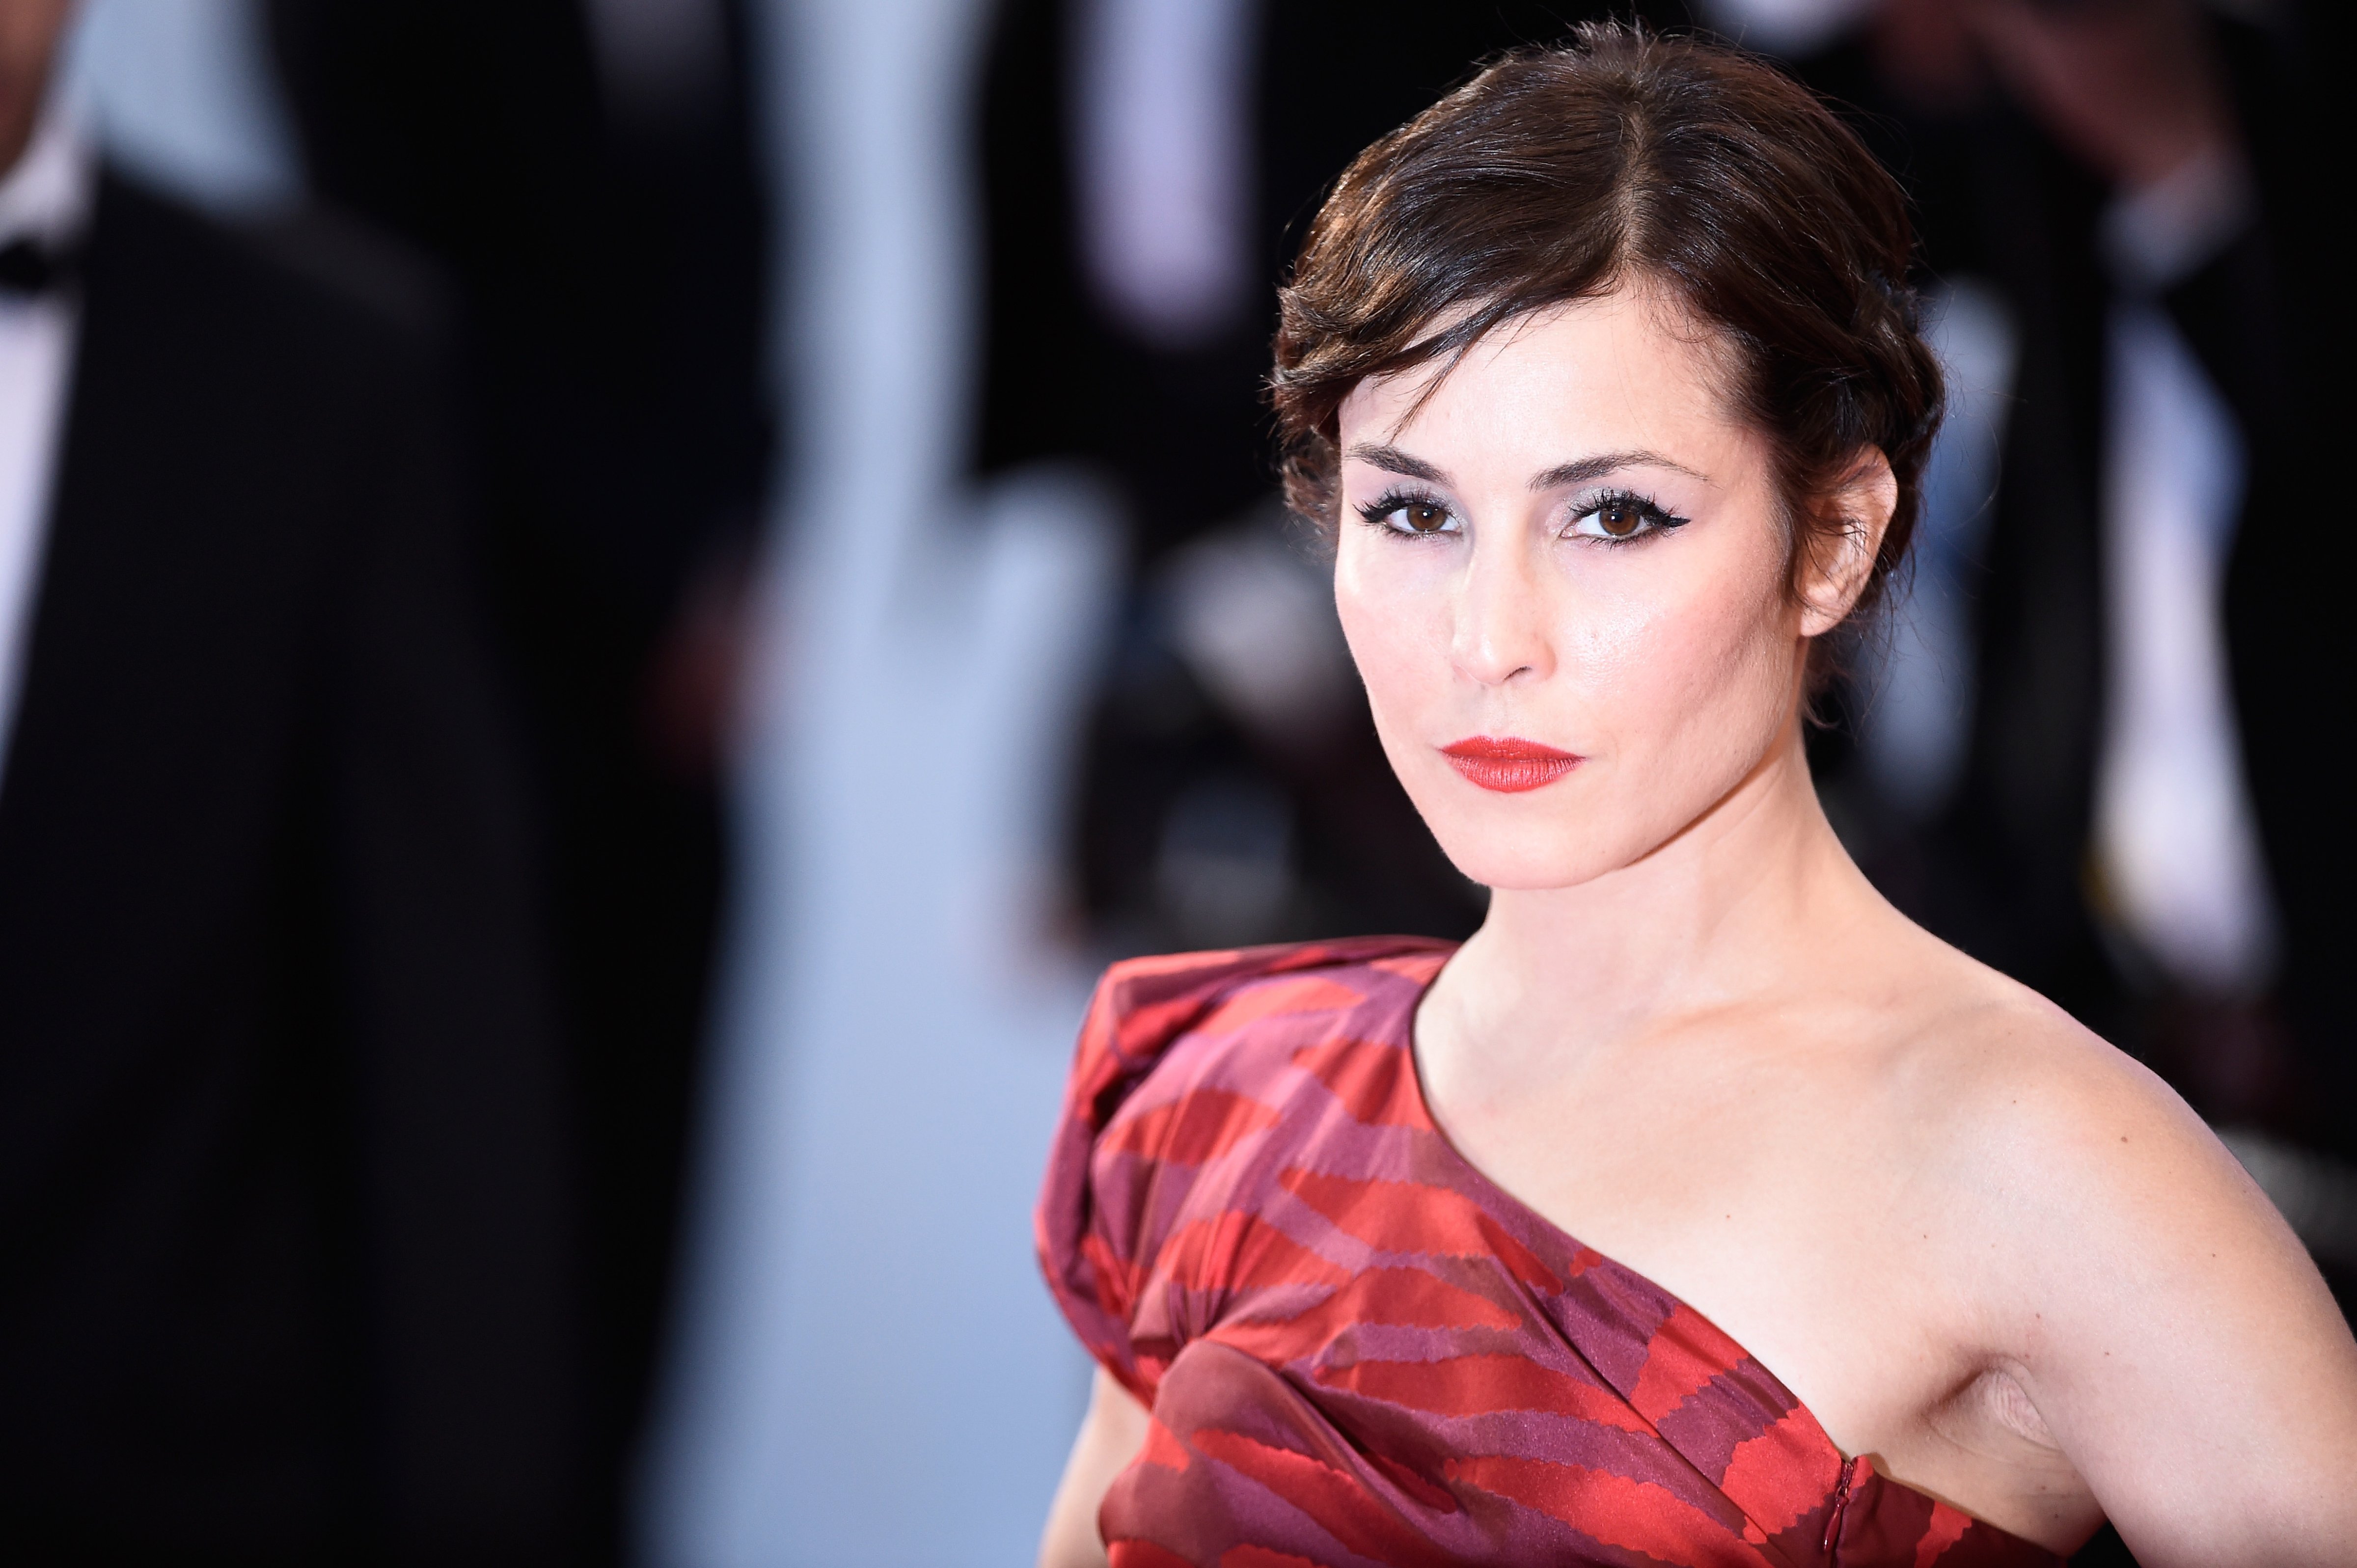 Noomi Rapace attends the Premiere of 